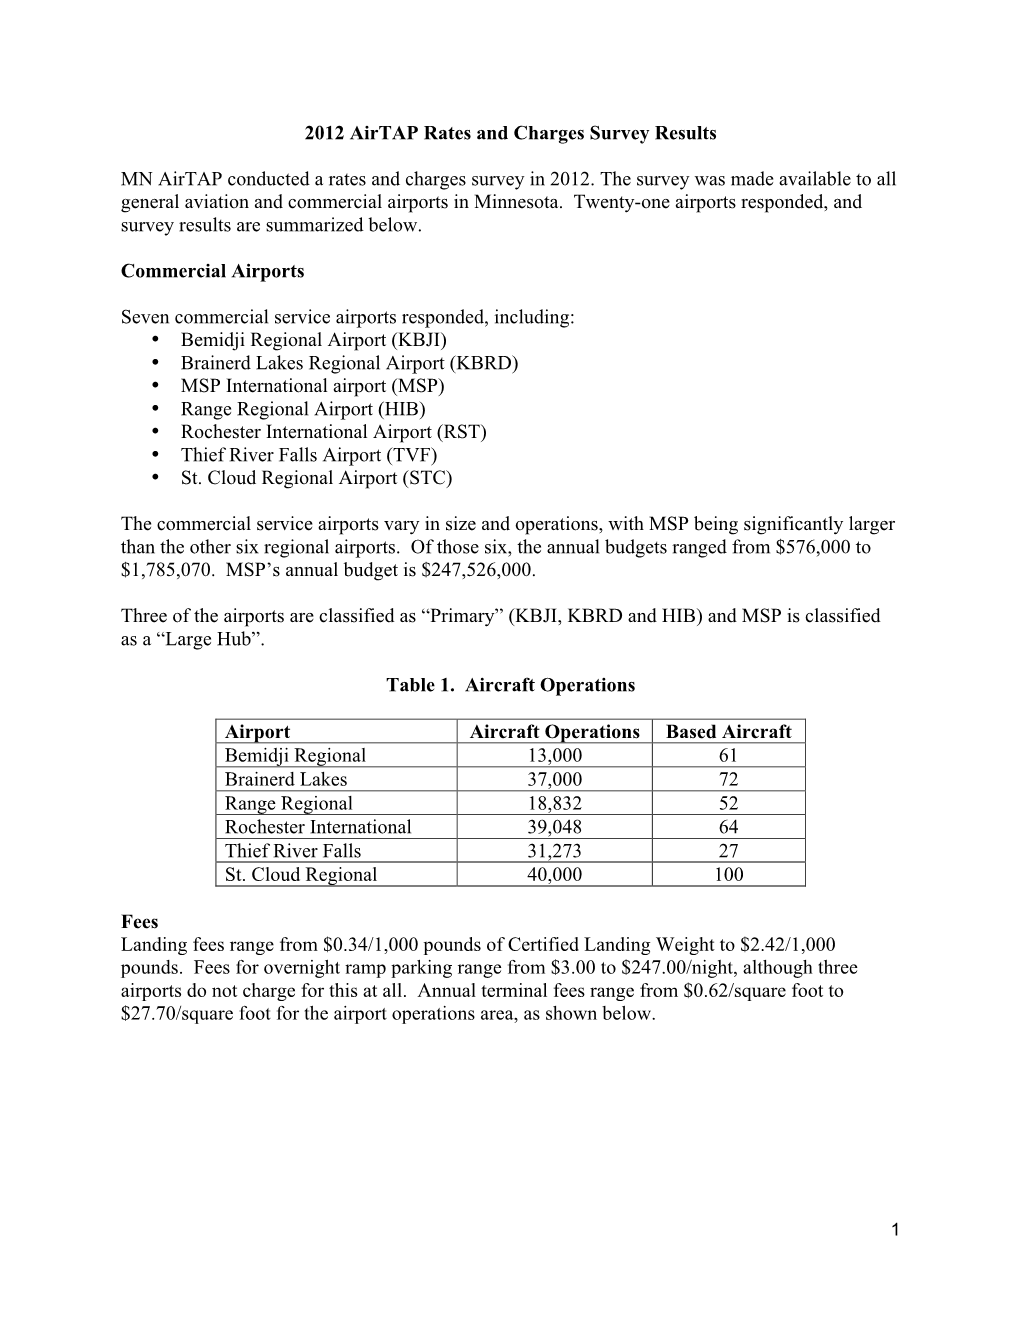 Airtap 2012 Rates and Charges Survey Results